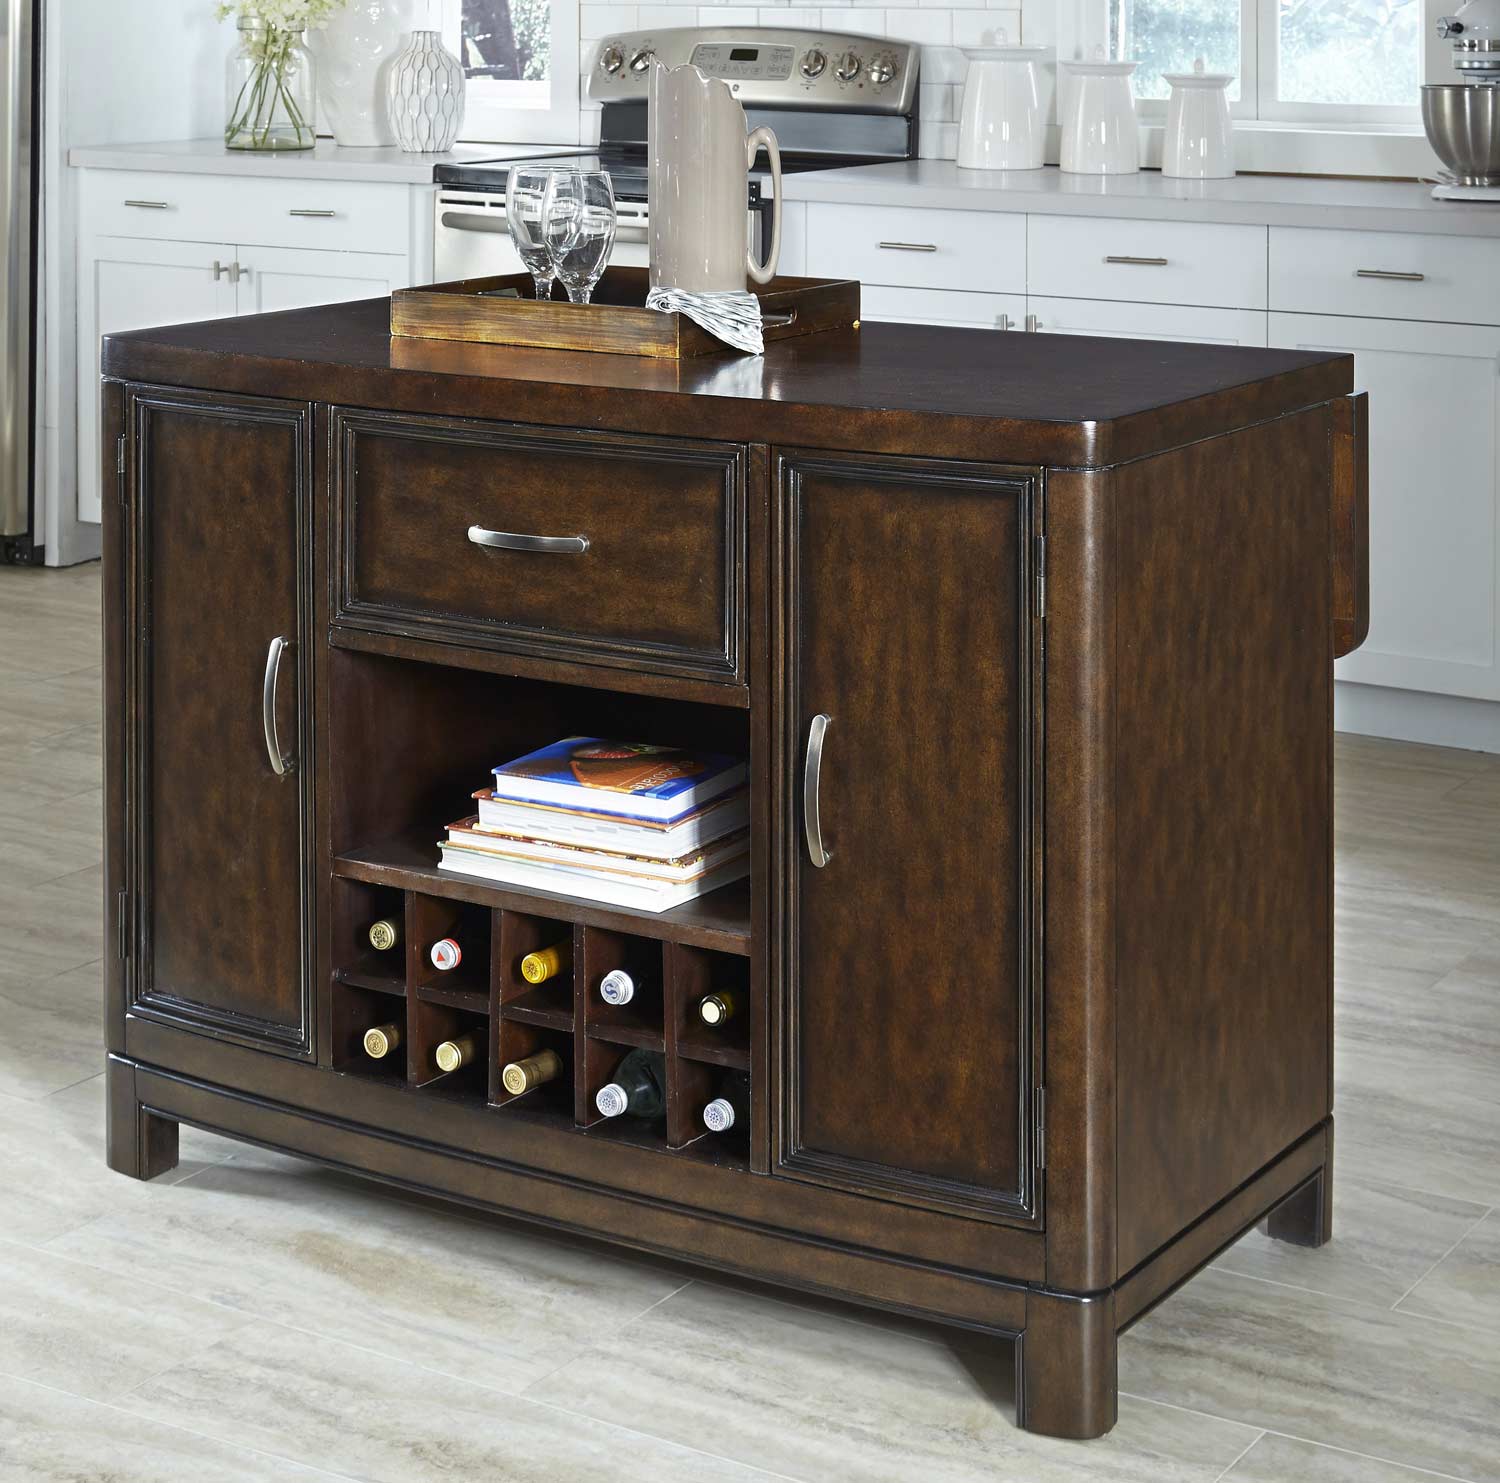 Home Styles Crescent Hill Kitchen Island - Two-tone tortoise shell